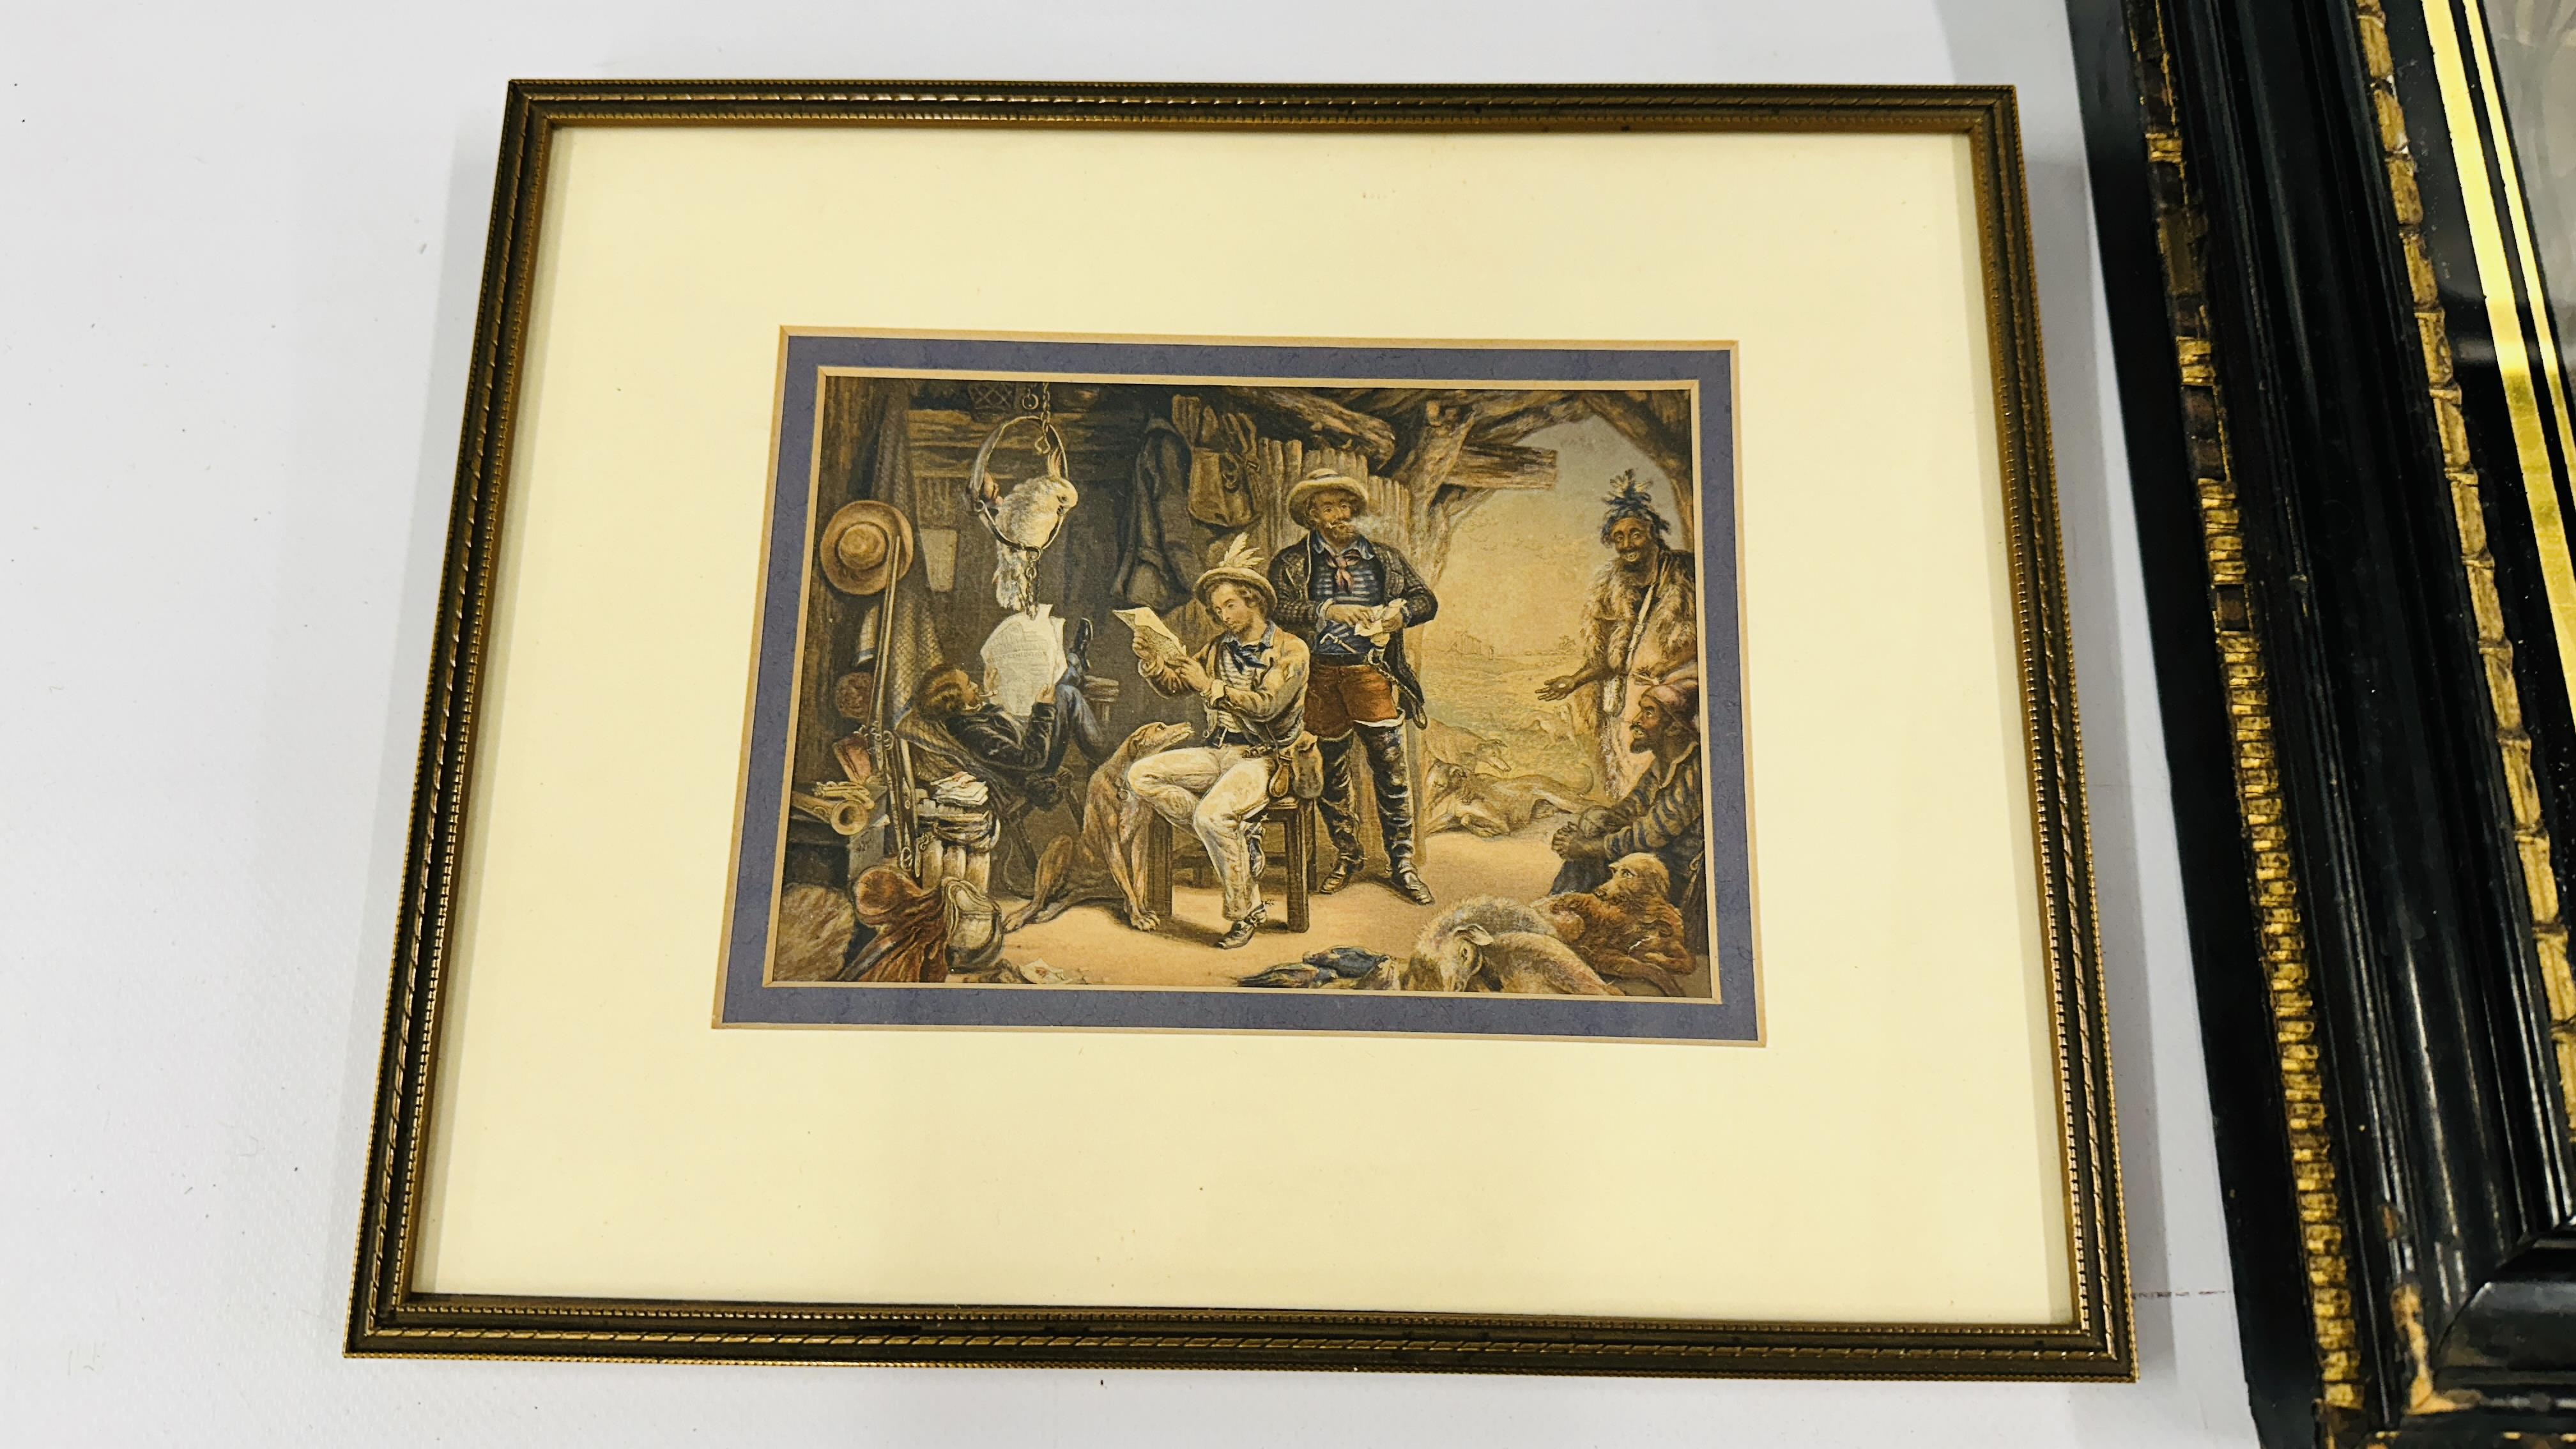 A FRAMED ANTIQUE MEZZOTINT ALONG WIITH 2 BAXTER PRINTS (C1854) NEWS FROM AUSTRALIA AND FROM HOME - Image 3 of 5